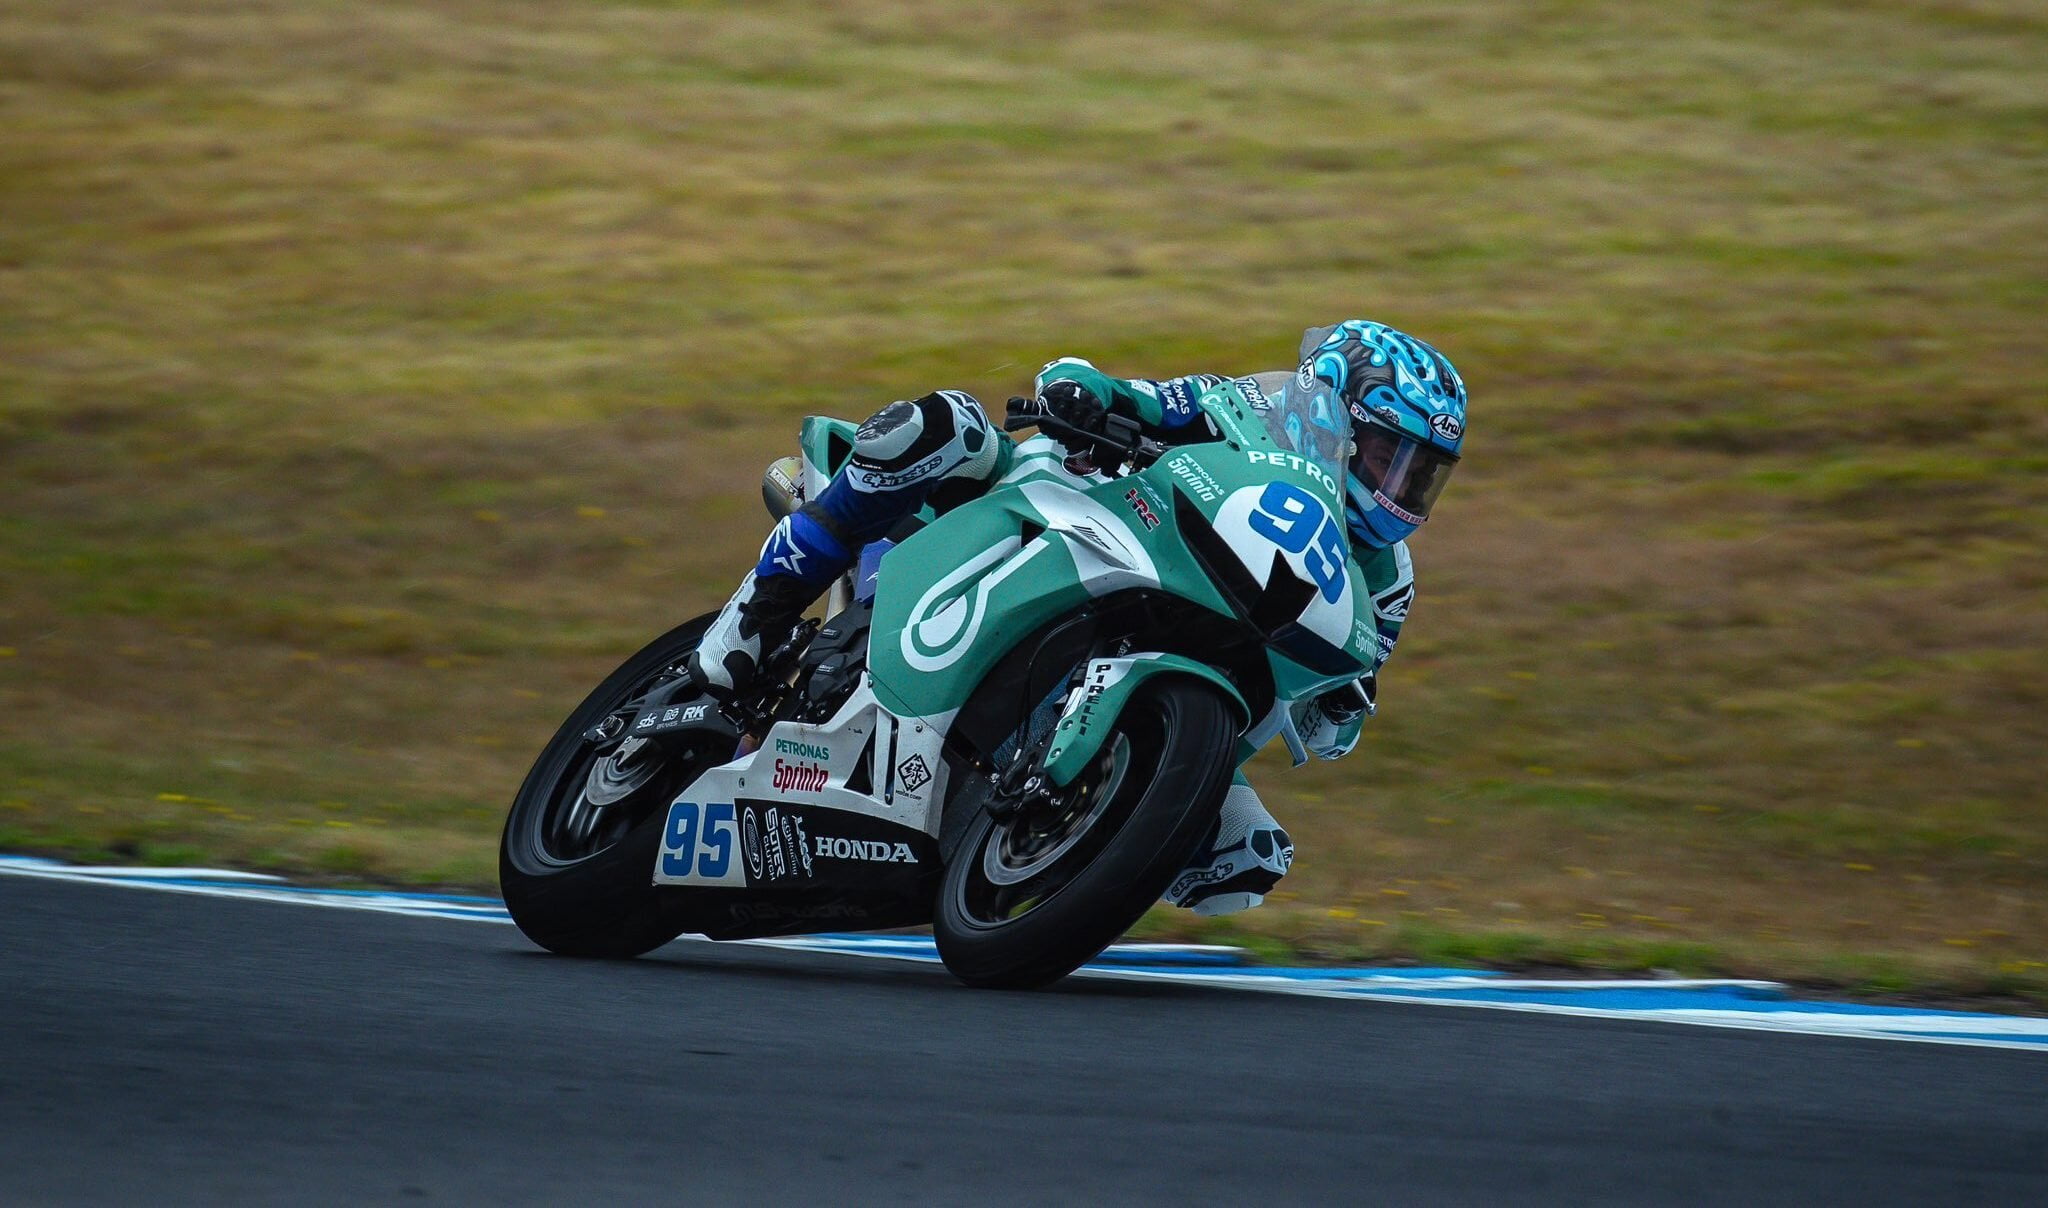 Tarran Mackenzie opened his World Supersport Championship account with 5th place in race 1